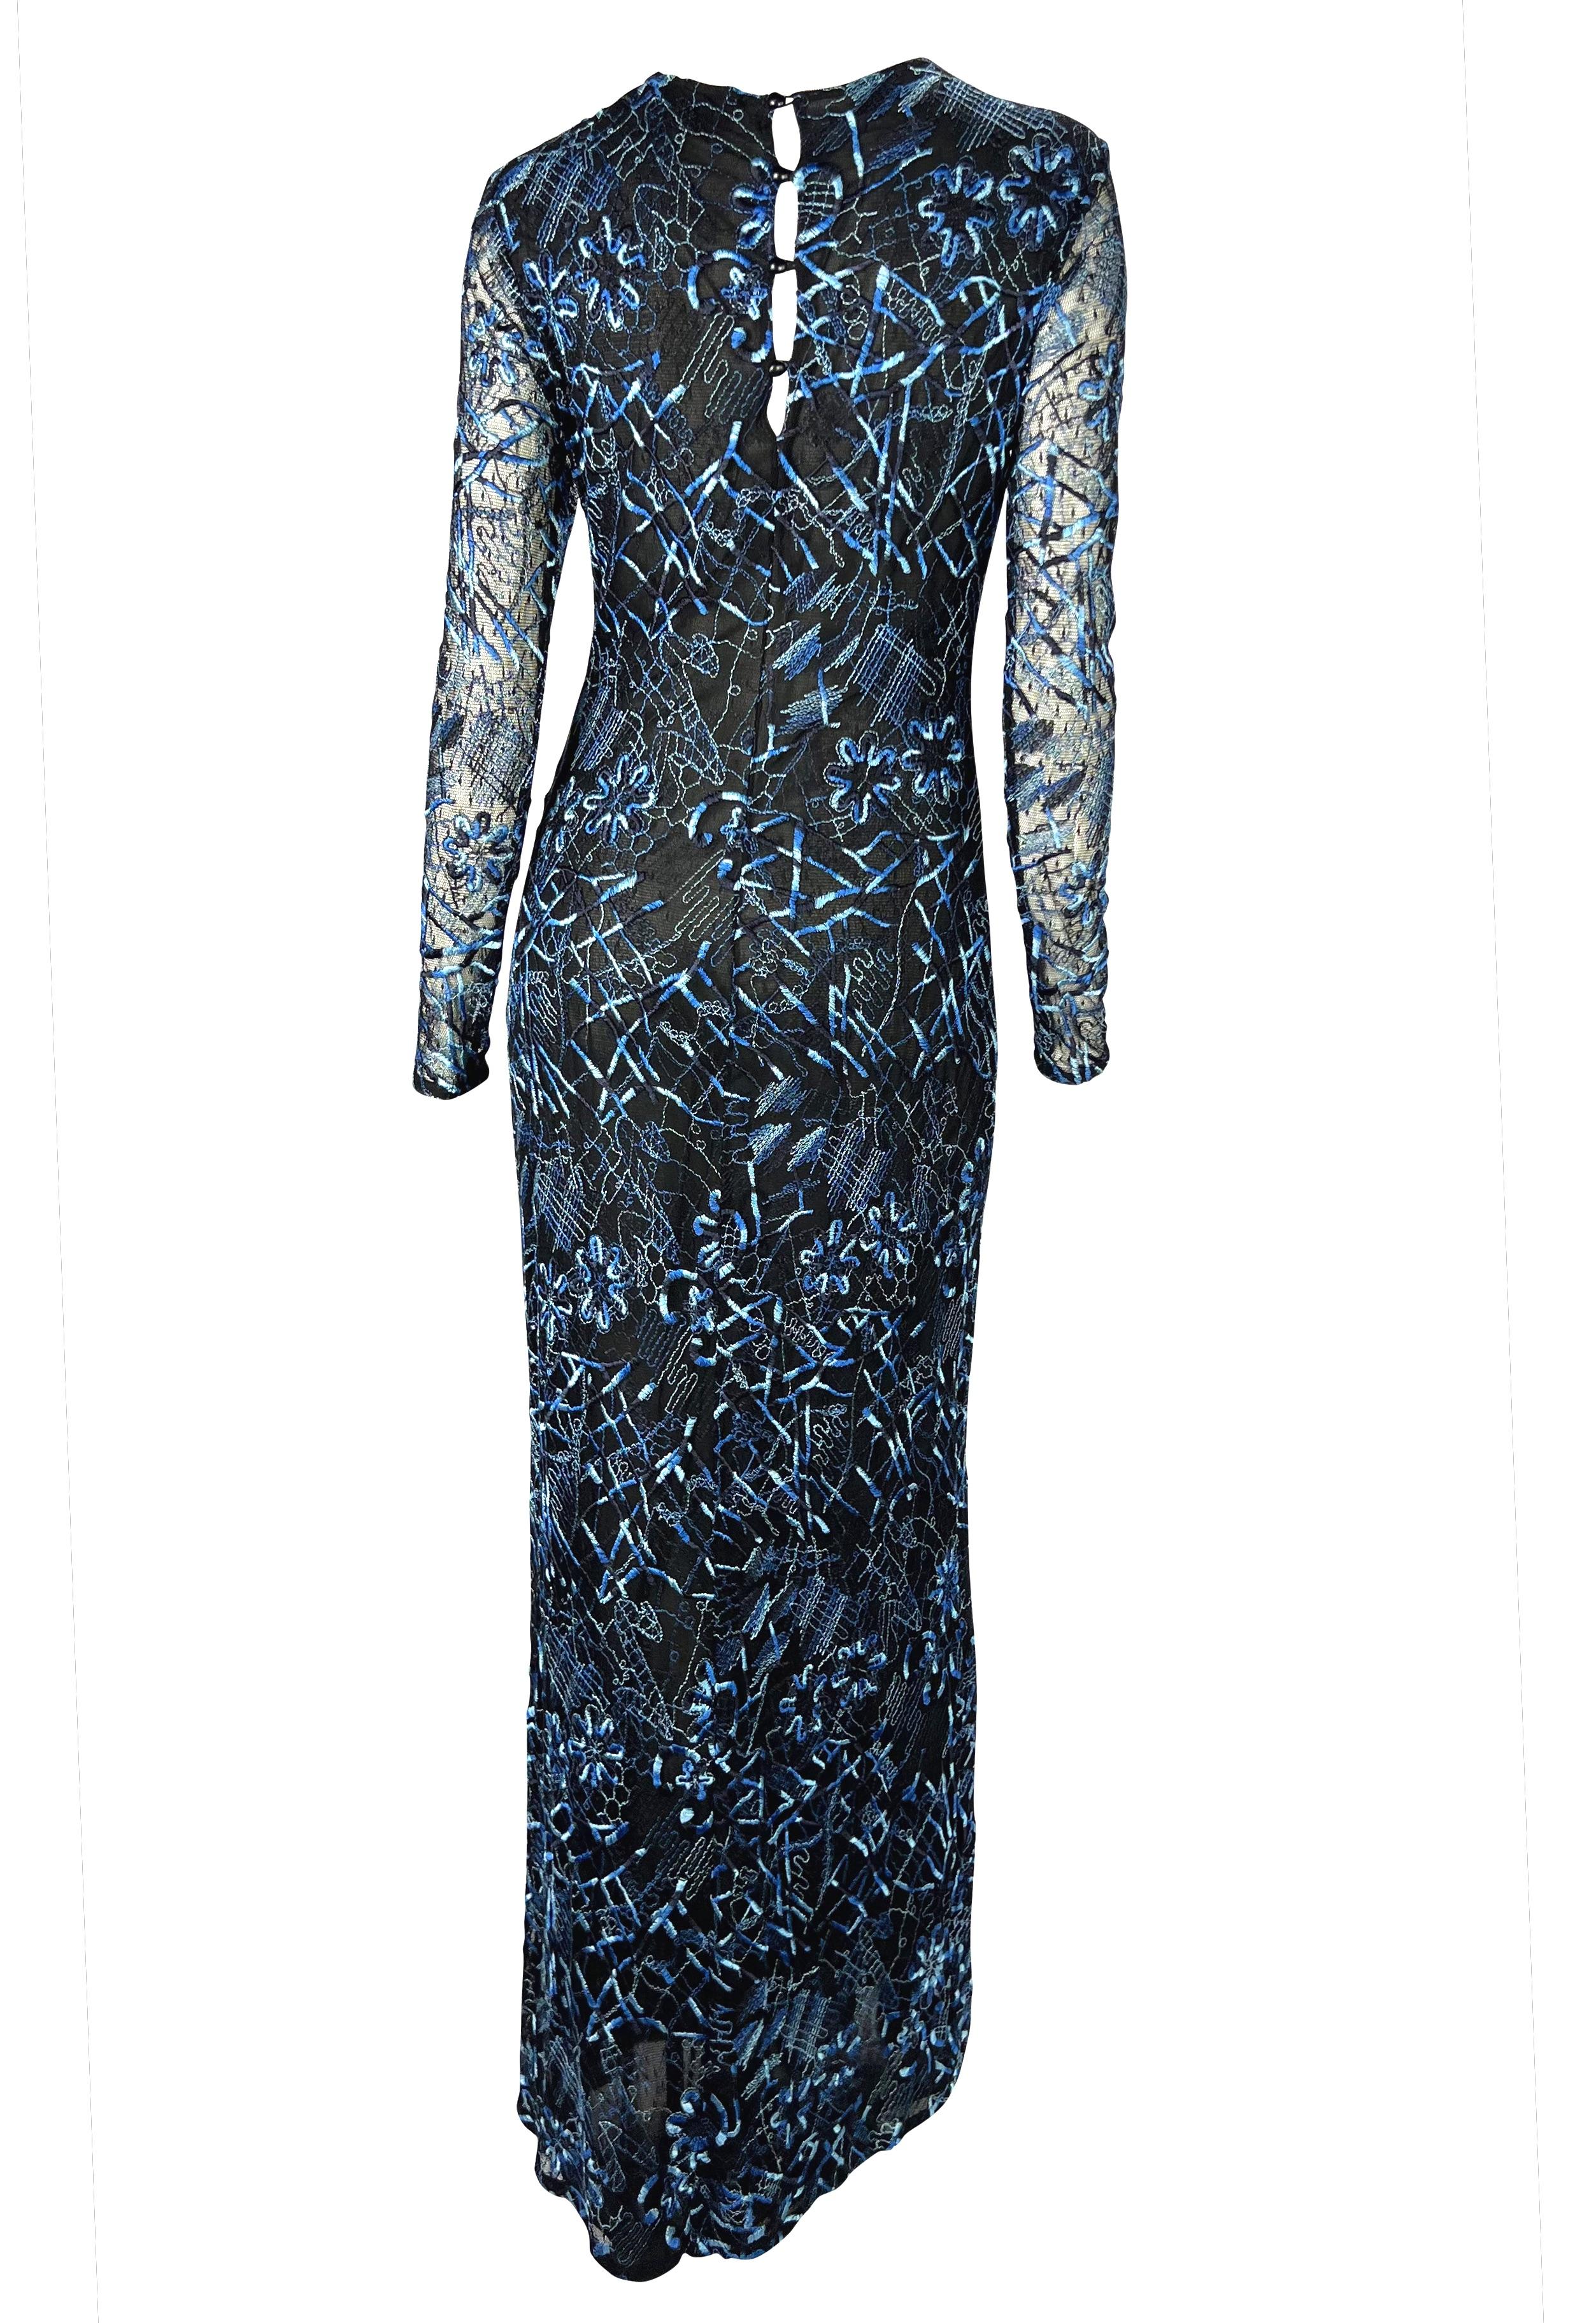 S/S 1998 Christian Lacroix Black Stretch Sheer Mesh Blue Embroidered Maxi Dress For Sale 2